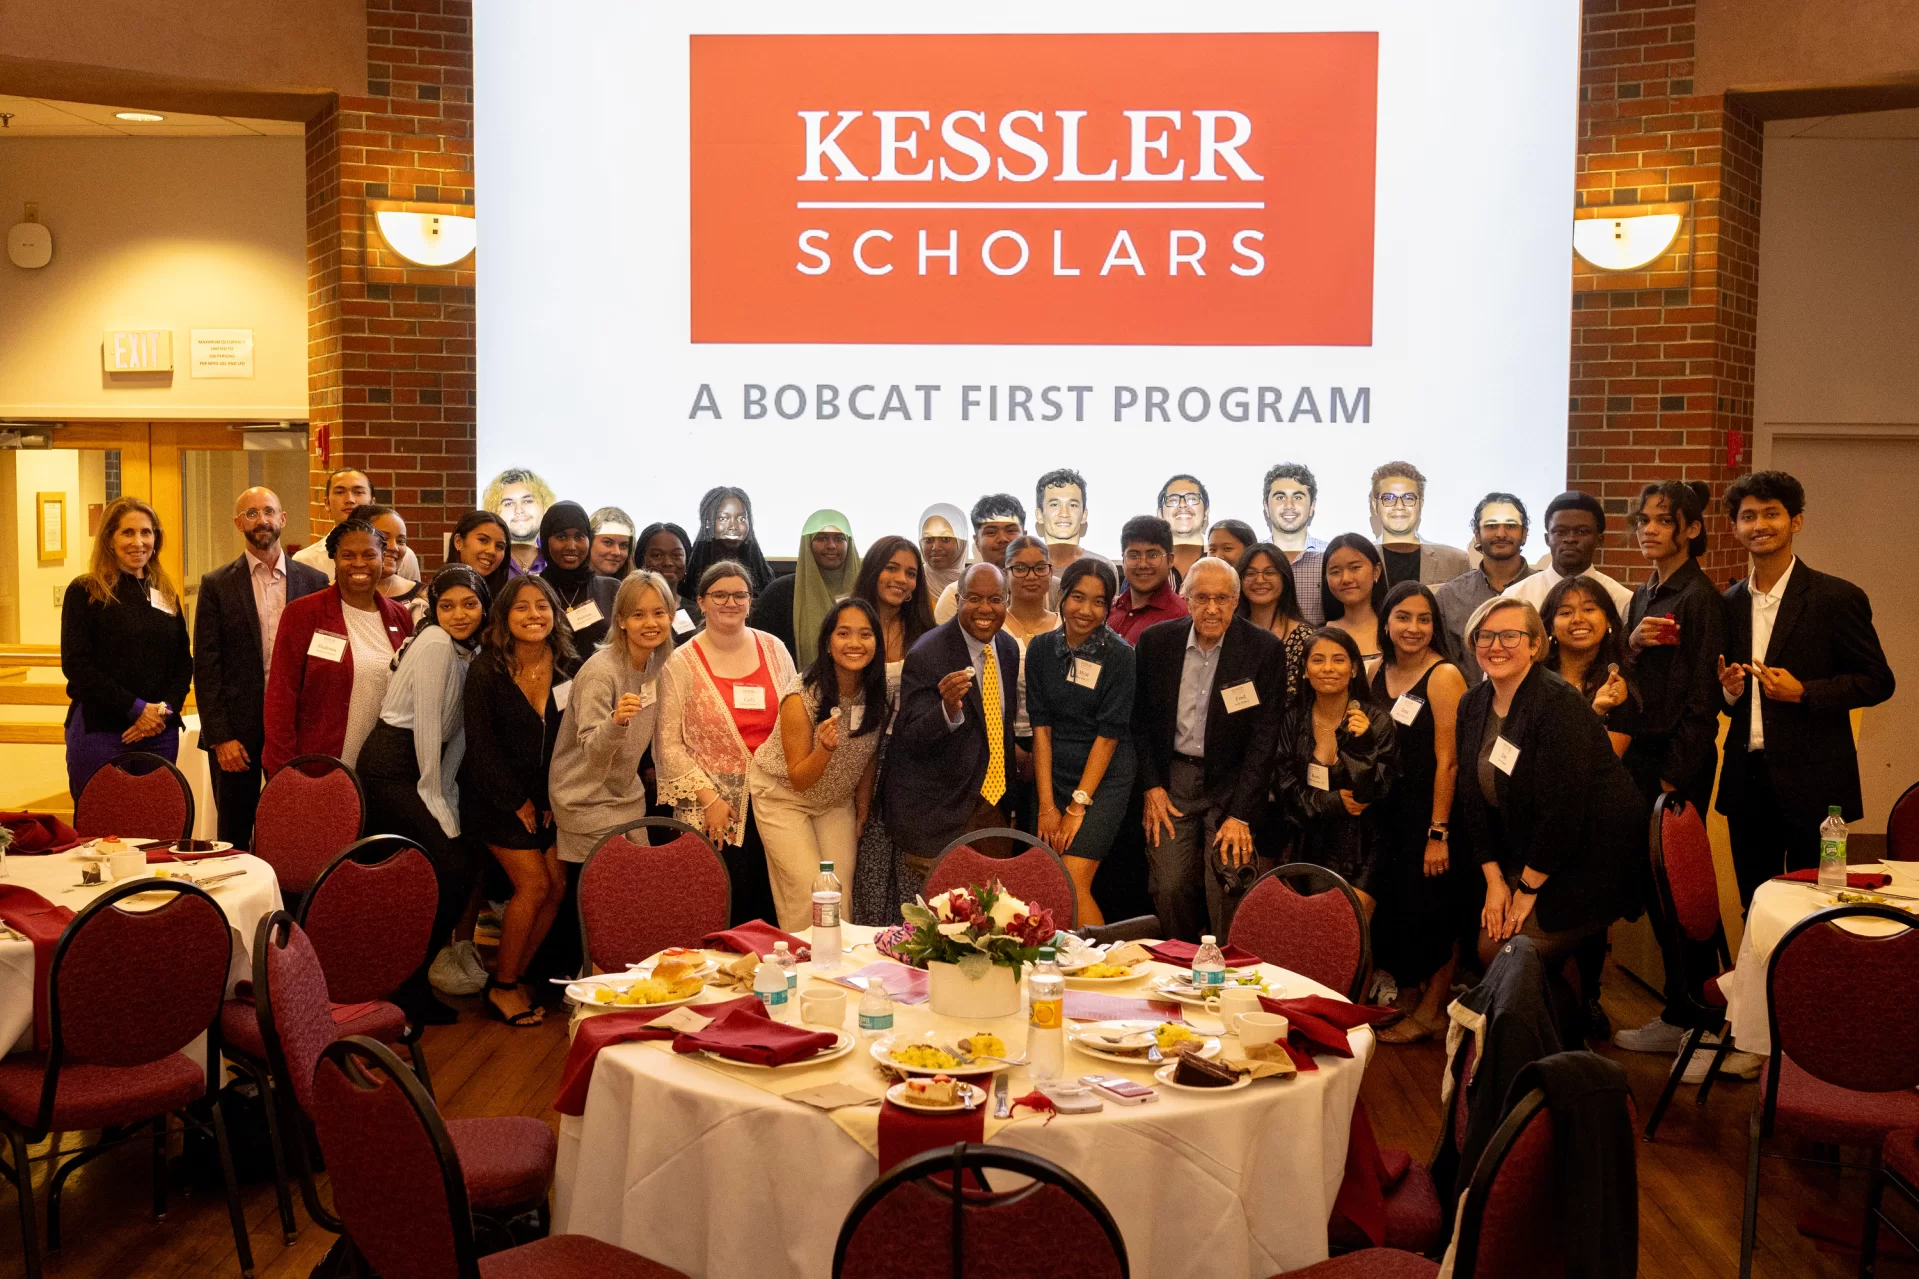 Introducing your 2023-24 Kessler Scholars!

President Garry W. Jenkins (@presgarryjenkins) poses with the college's first and already amazing cohort of Kessler Scholars during a Sept. 13 Kessler Scholars Coin Ceremony. The ceremony kicked off the scholars' bright journey at Bates and beyond and helped to welcome the scholars to the National Kessler Scholars Collaborative.

Kessler Scholars, a Bobcat First Program, provides holistic support, including mentoring, for a diverse community of high-achieving Bates students who are the first in their family to pursue a four-year college degree.

In the second photo, Azajul Islam Neloy ’27 of Dhaka, Bangladesh, proudly holds a commemorative coin, presented to each new Kessler Scholar in the Bates Class of 2027 during the ceremony and dinner. “The support I have received as a Kessler Scholar from Bates has exceeded all of my expectations,” Neloy said. “The personalized mentoring sessions for the Kessler Scholars have given this initiative a new dimension. As an international student, I am immensely proud and honored to represent my country, Bangladesh, in the Kessler Scholars community.”

(Phyllis Graber Jensen/Bates College)